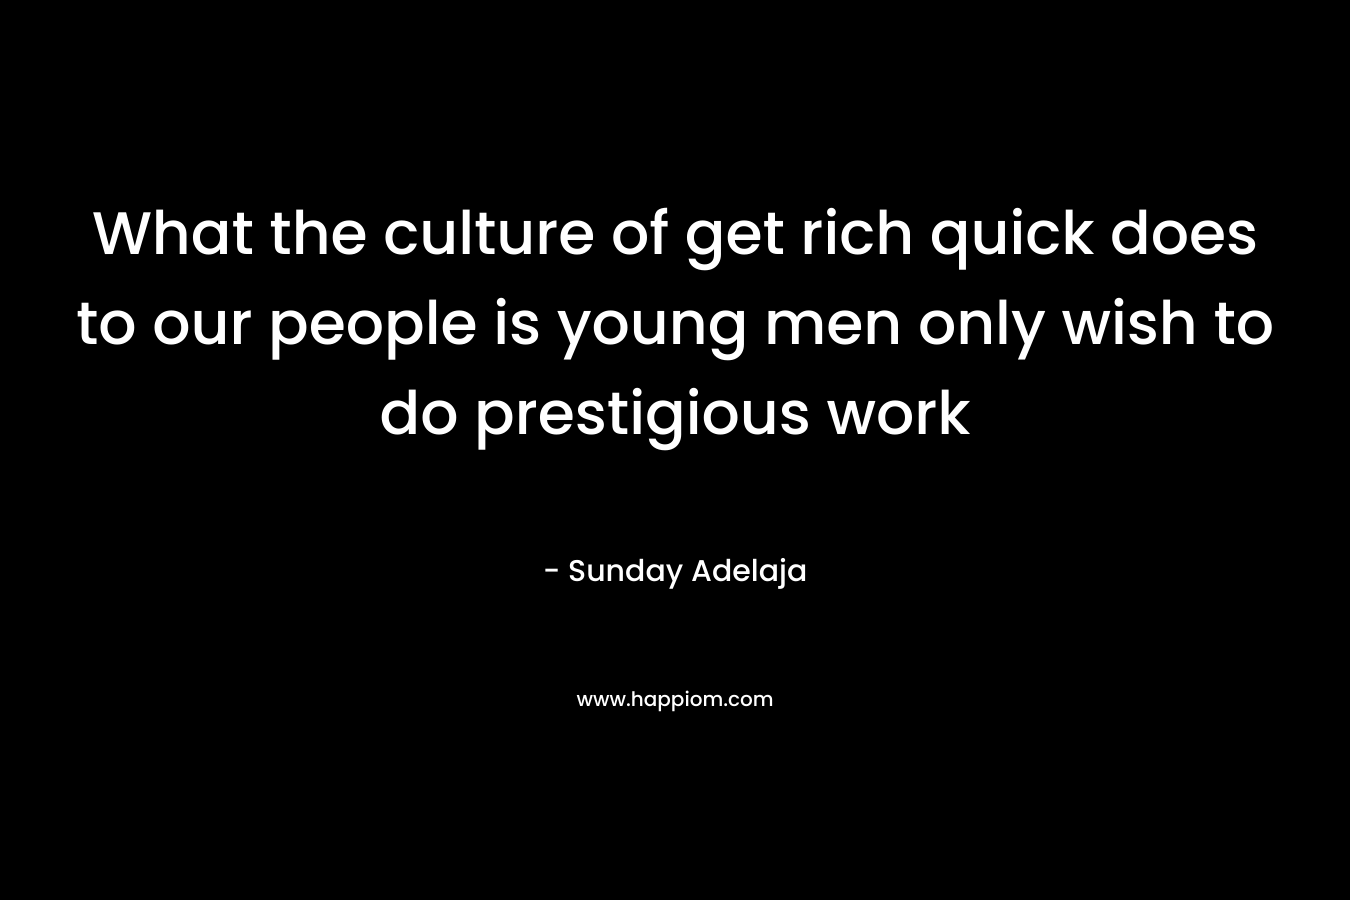 What the culture of get rich quick does to our people is young men only wish to do prestigious work